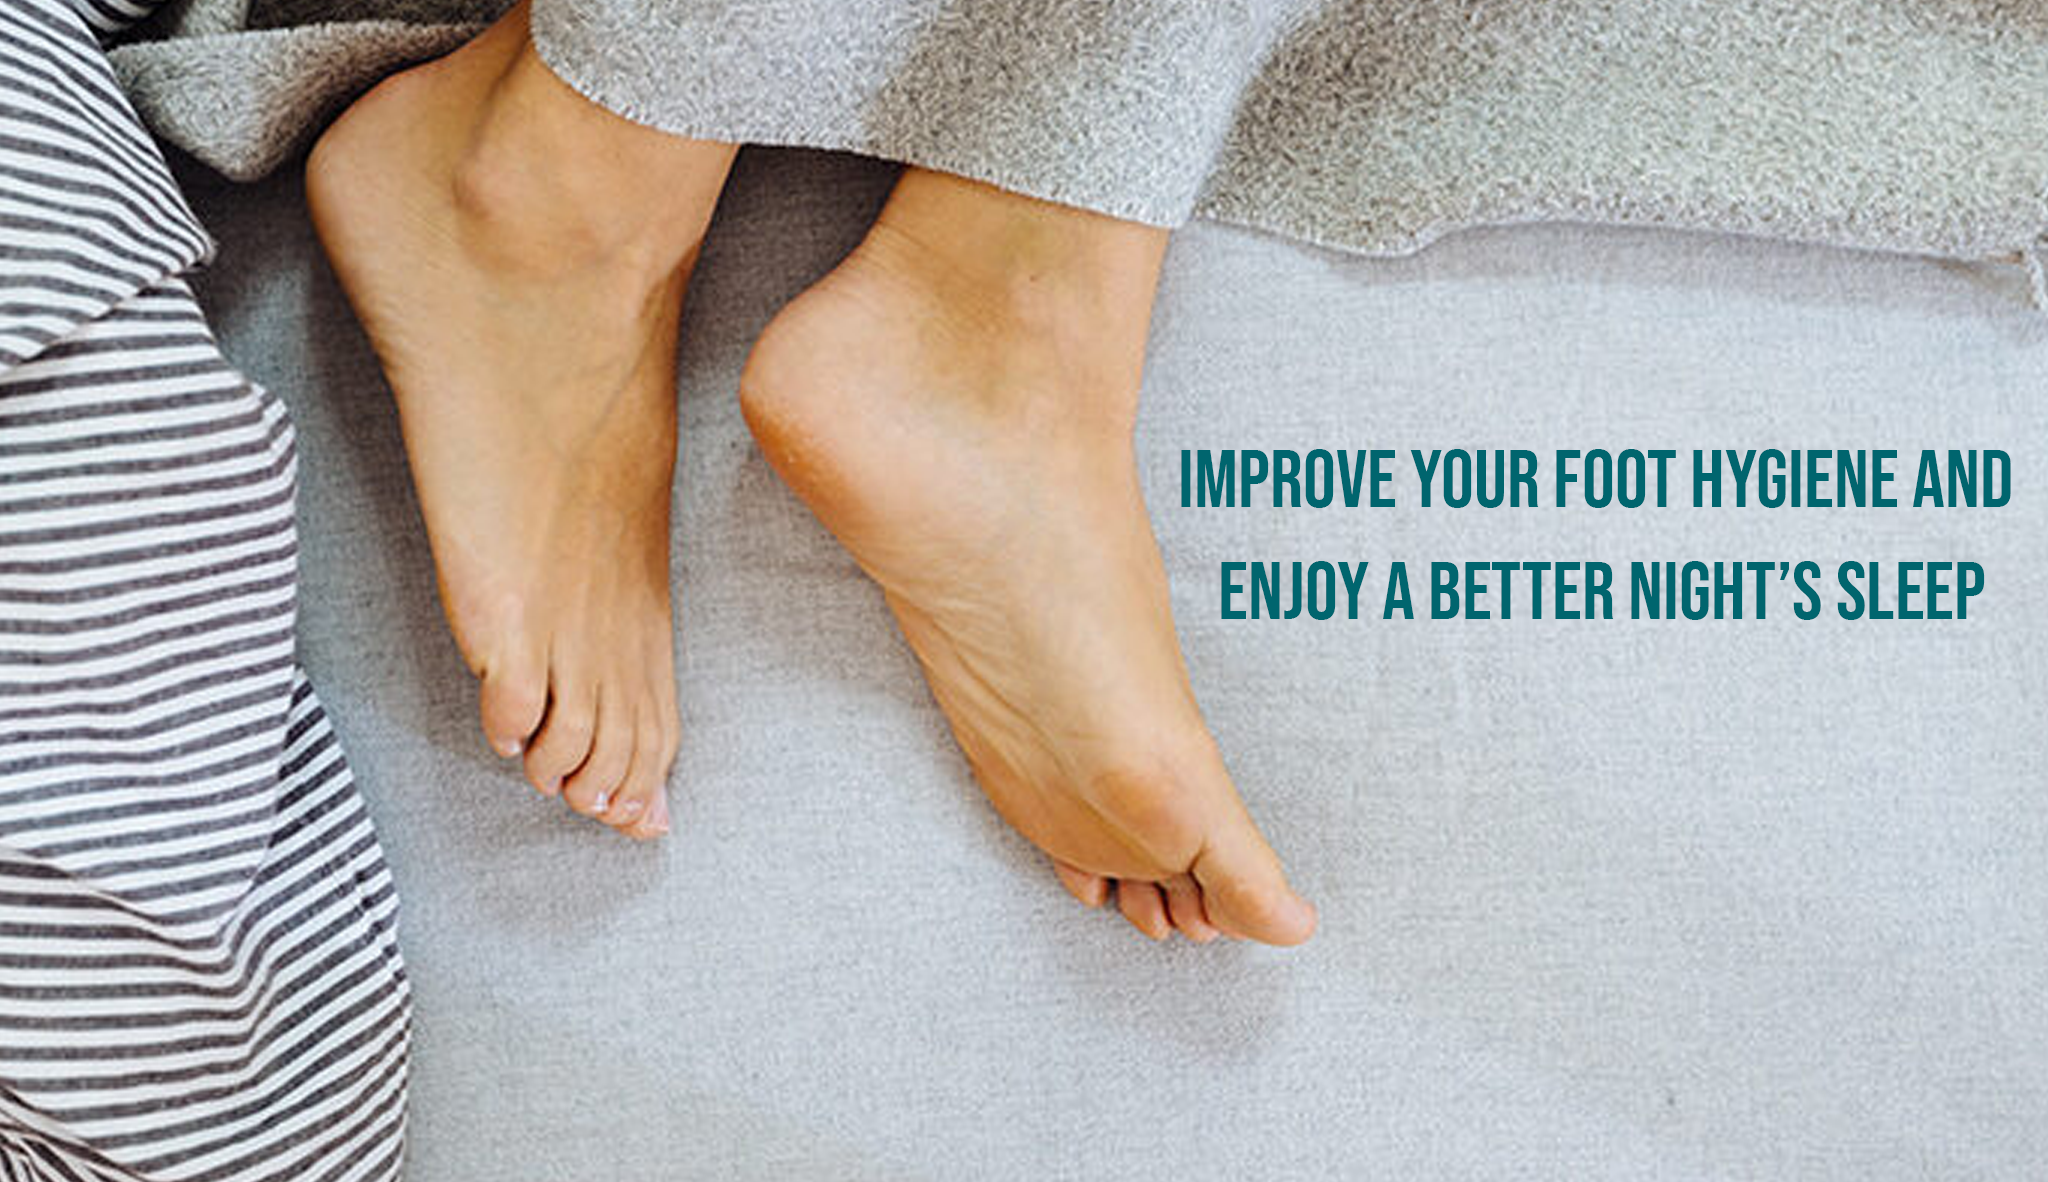 Improve Your Foot Hygiene And Enjoy A Better Night's Sleep